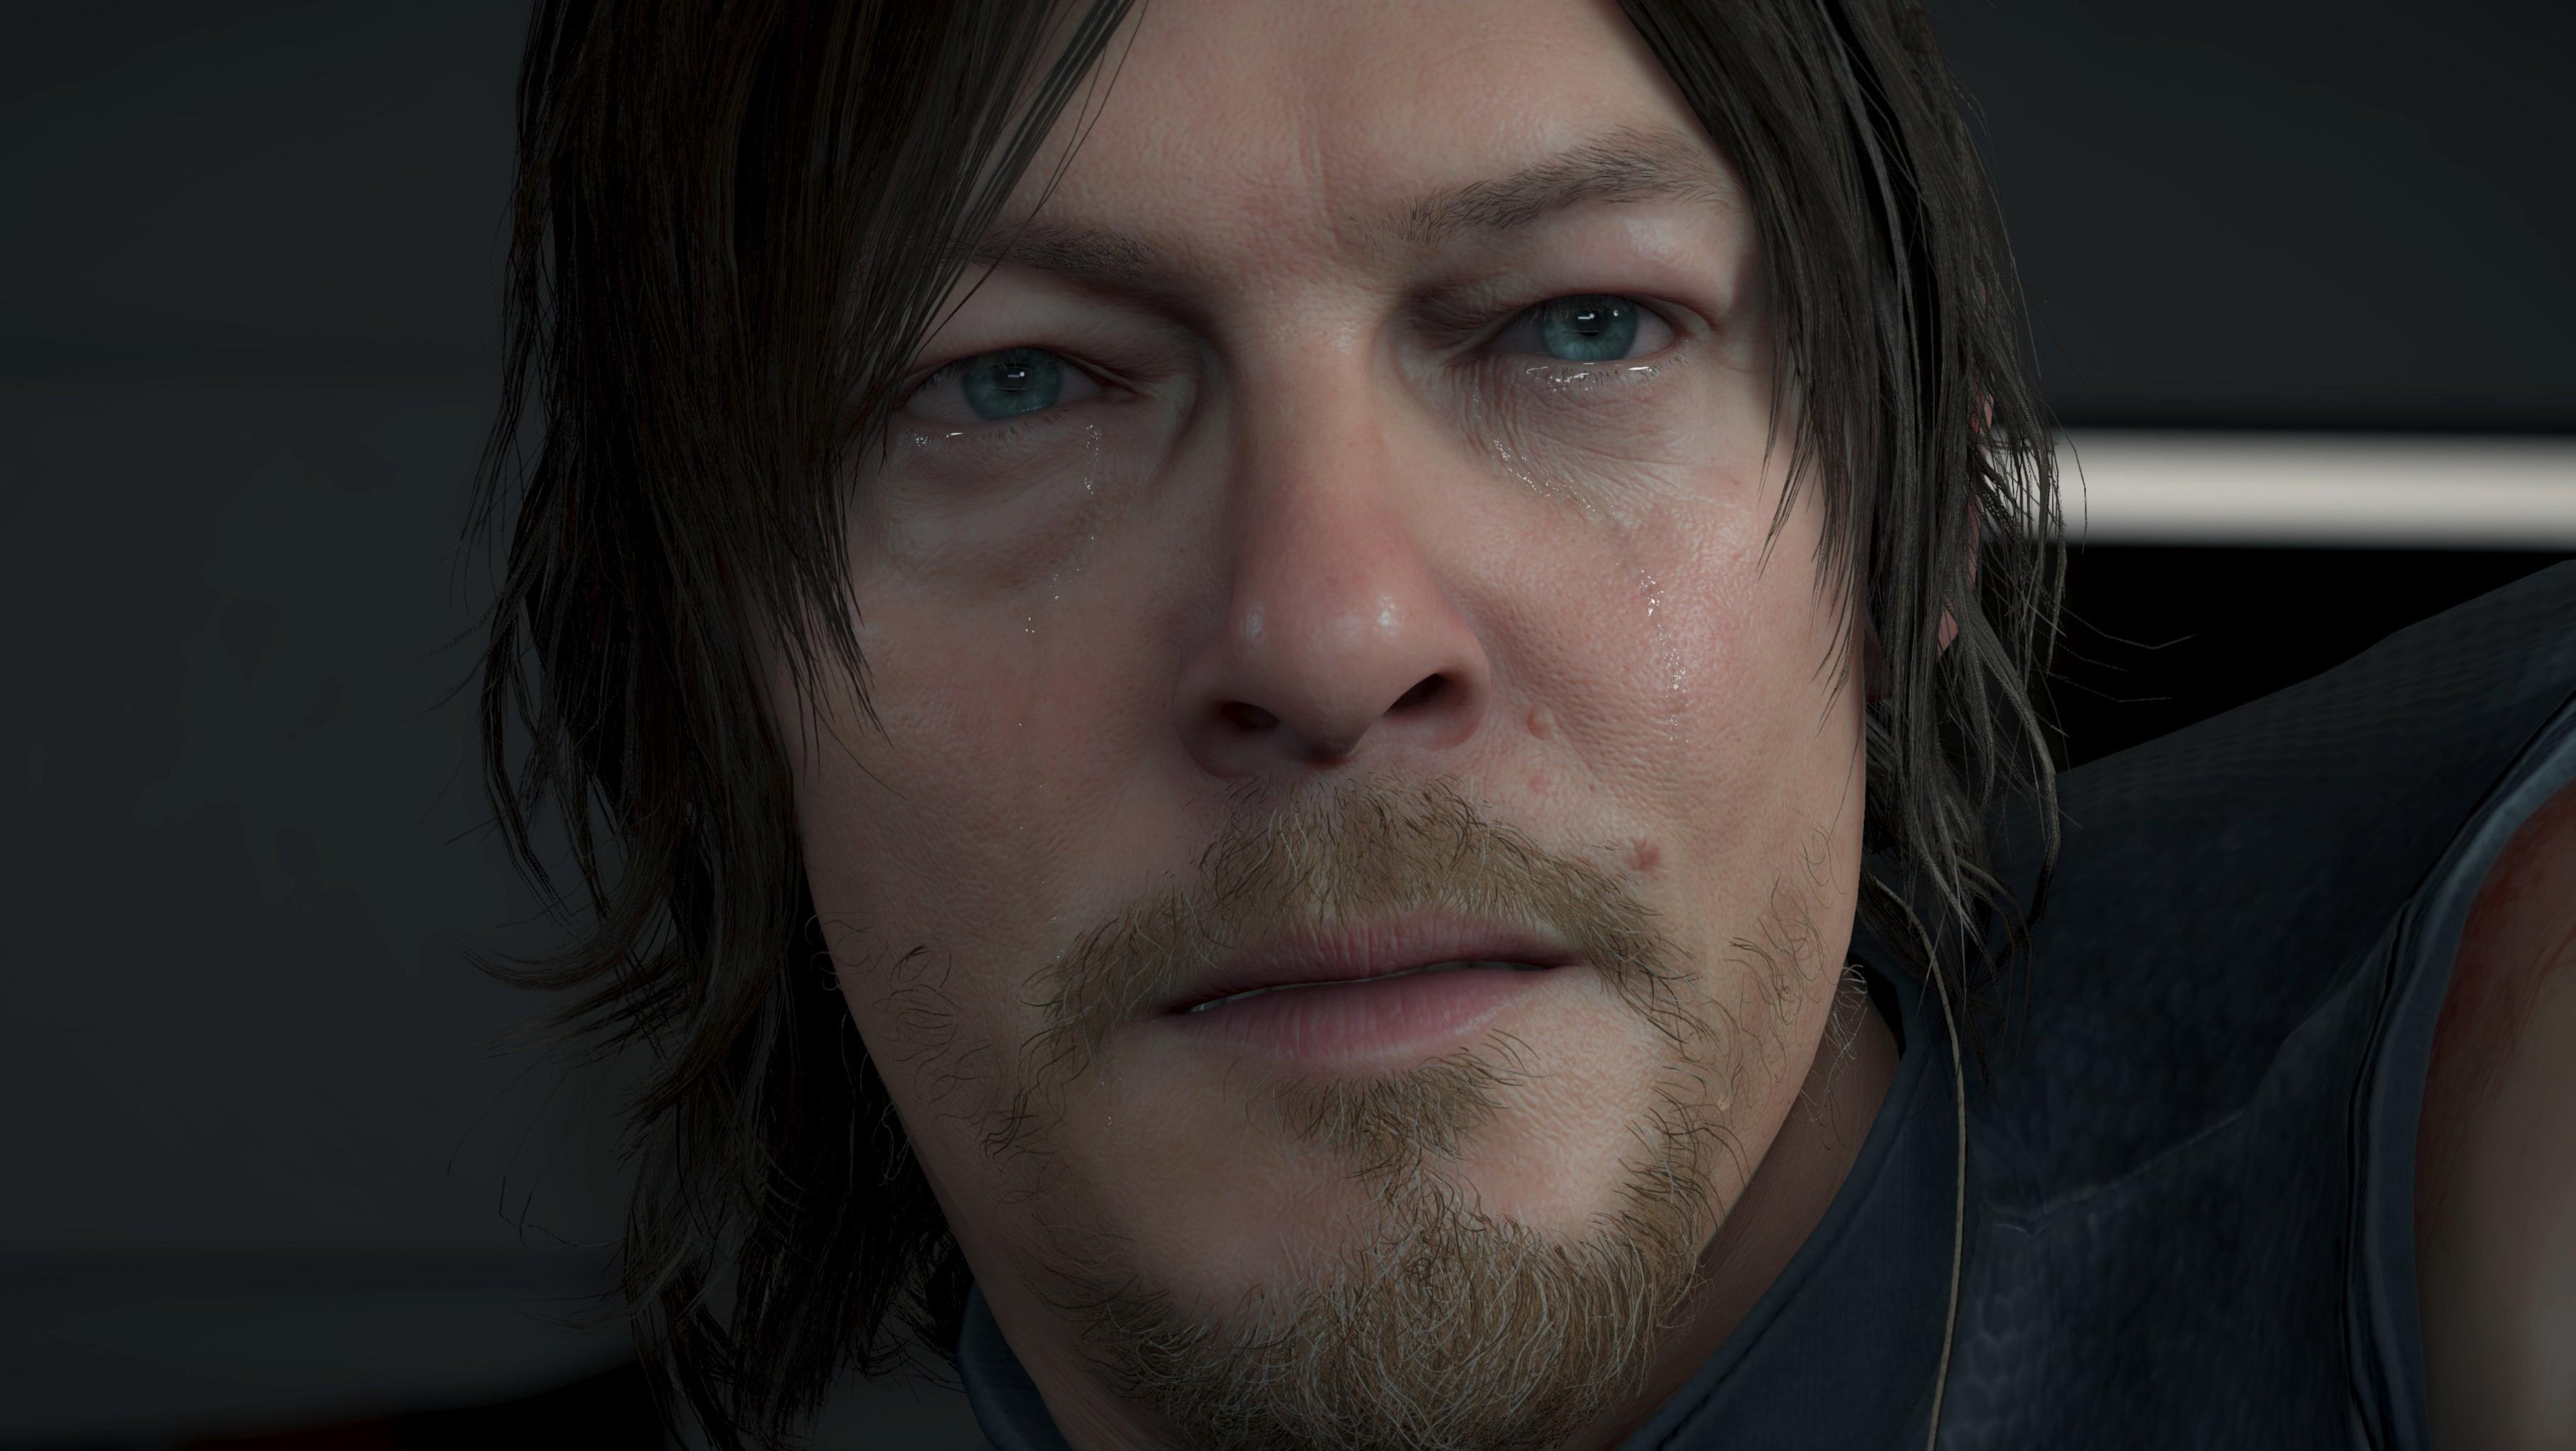 Norman Reedus casually reveals the existence of Death Stranding 2